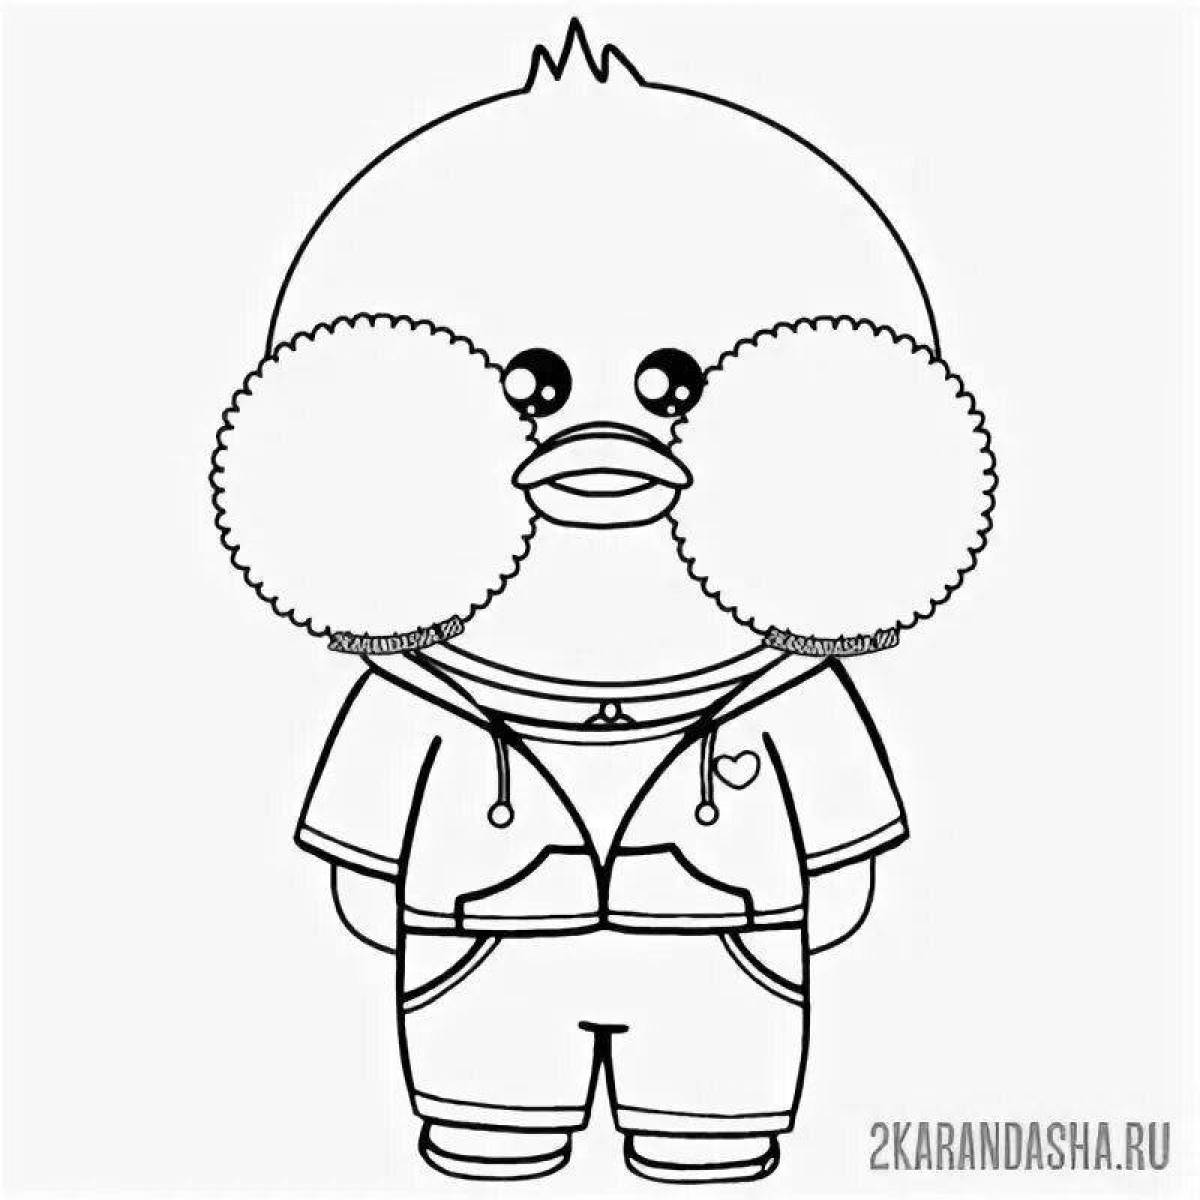 Coloring book sparkling duck - lalafanfan